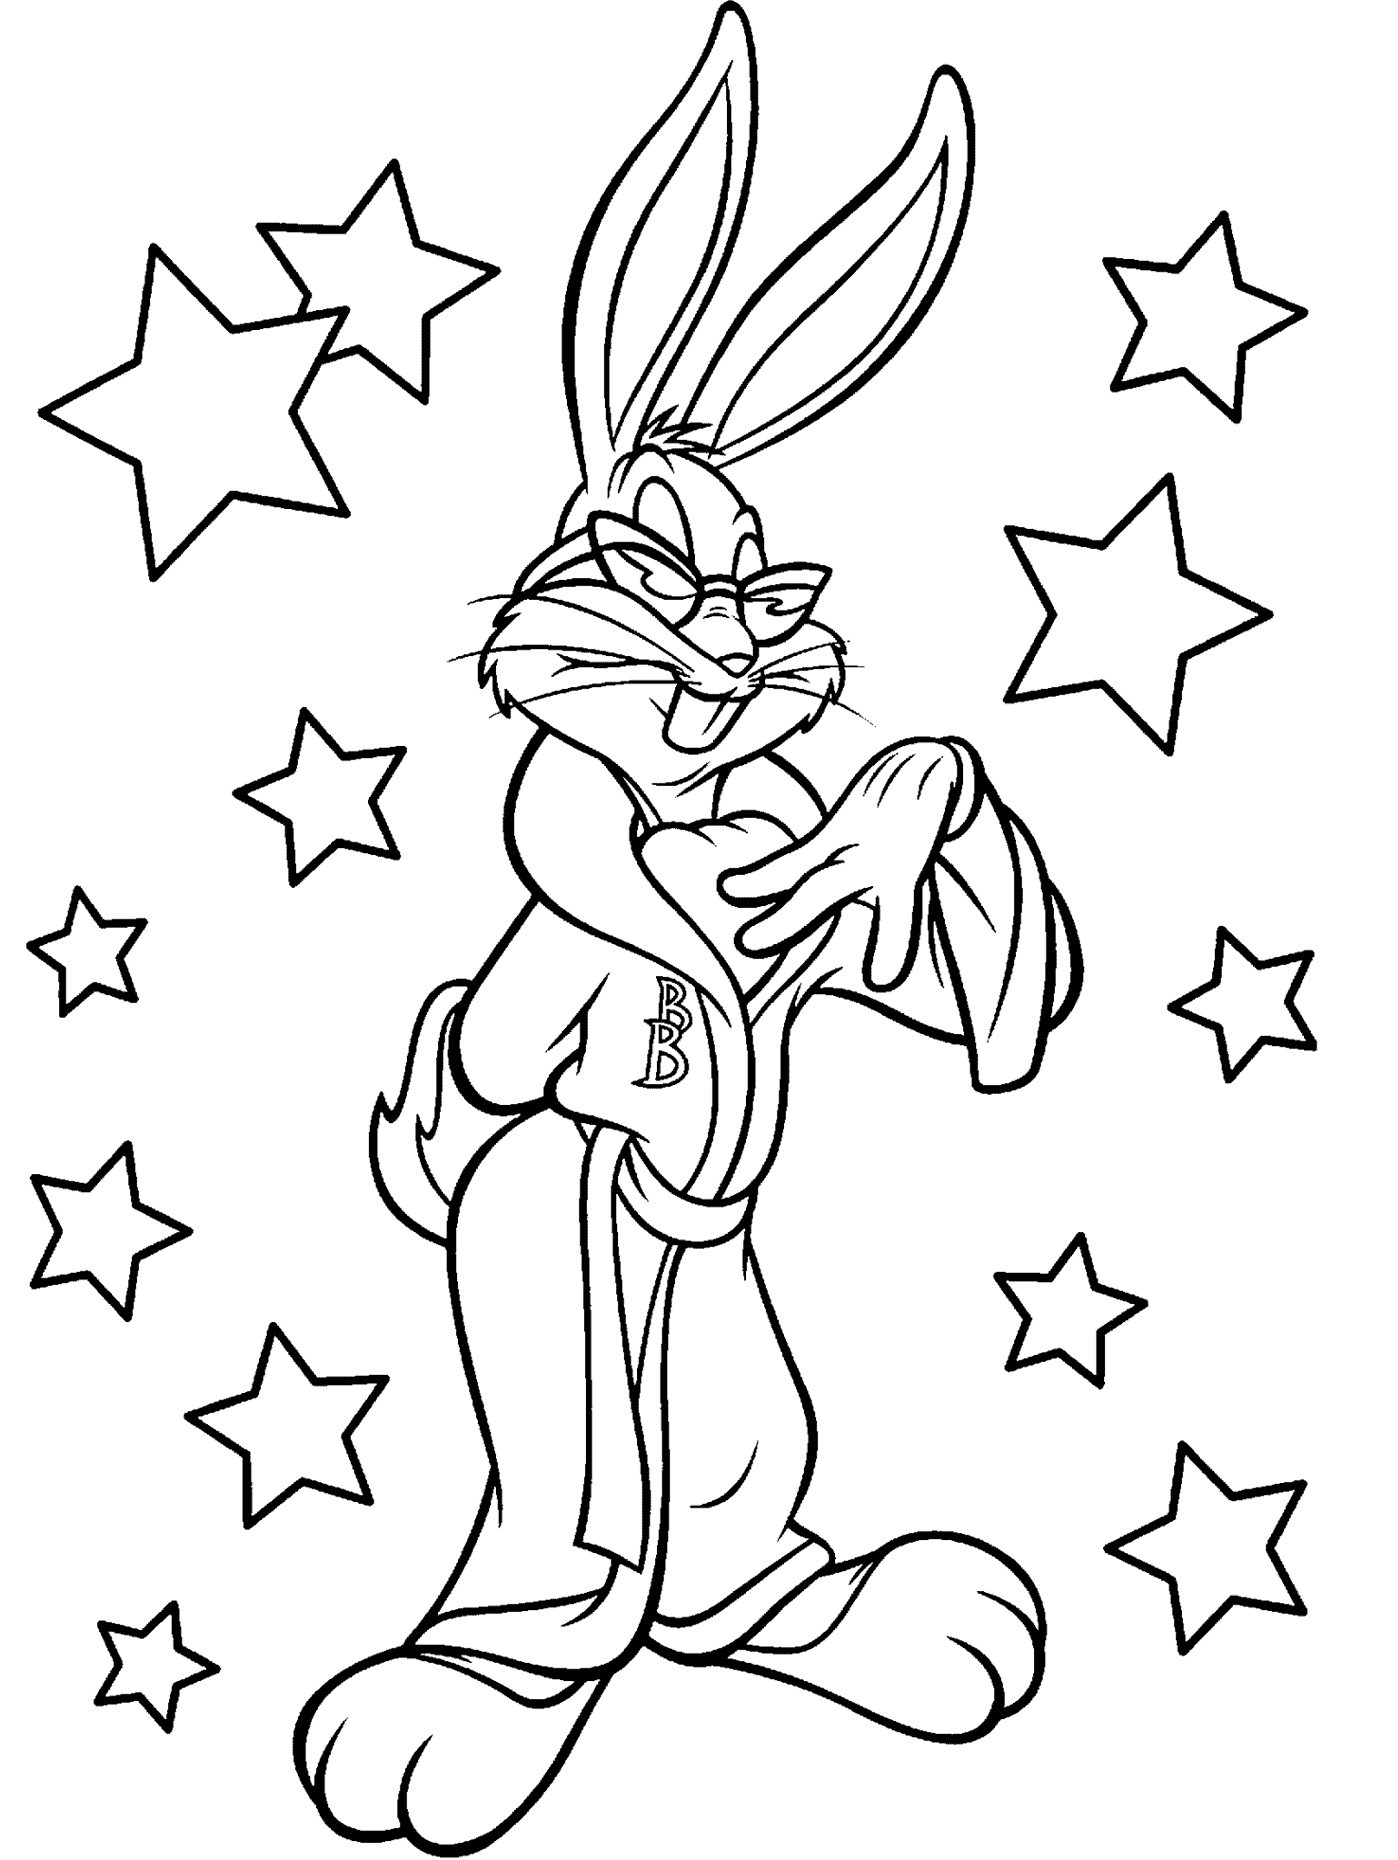 Bug Bunny Coloring Pages
 Free Printable Bugs Bunny Coloring Pages For Kids